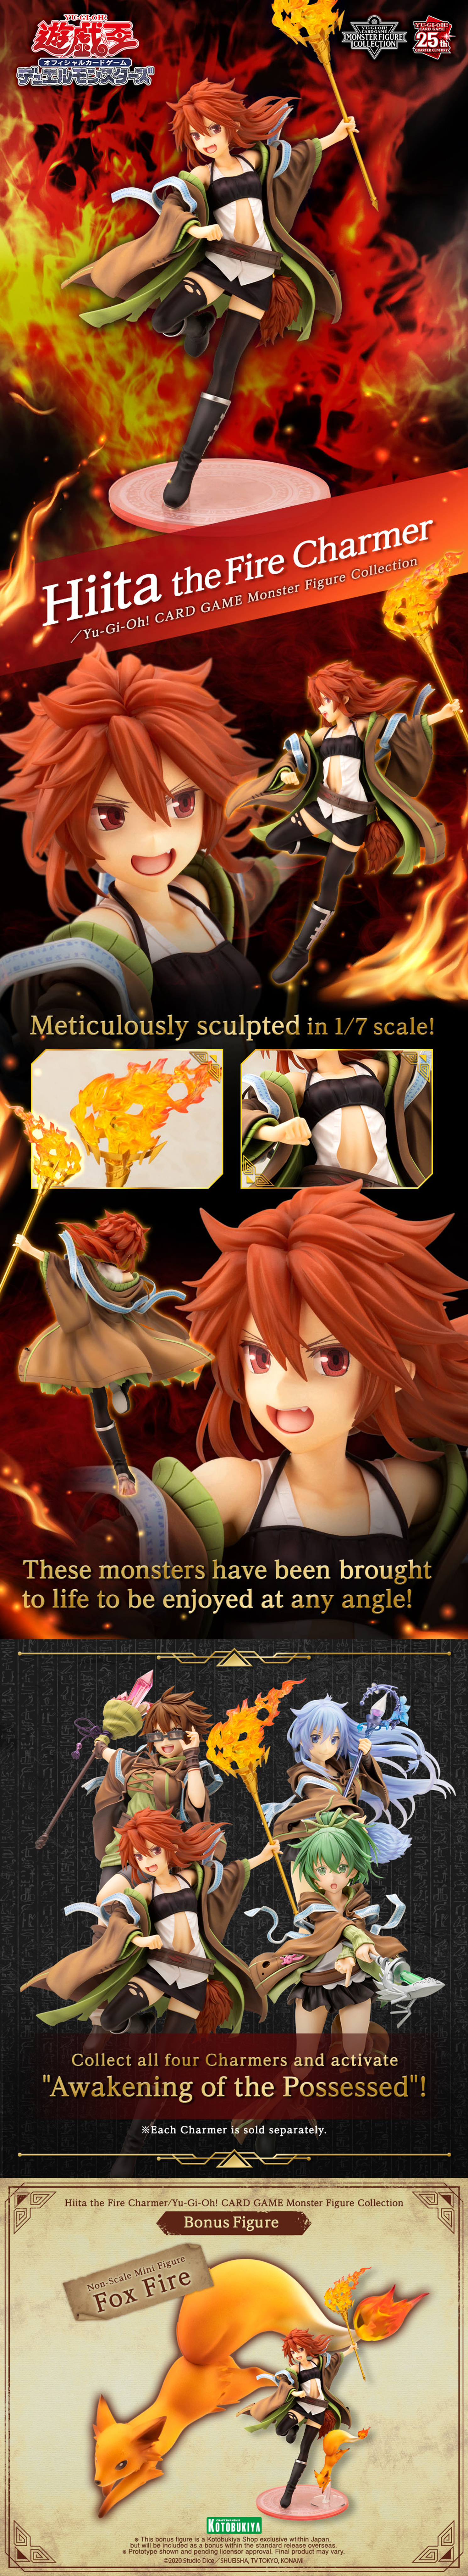 Hiita the Fire Charmer product information